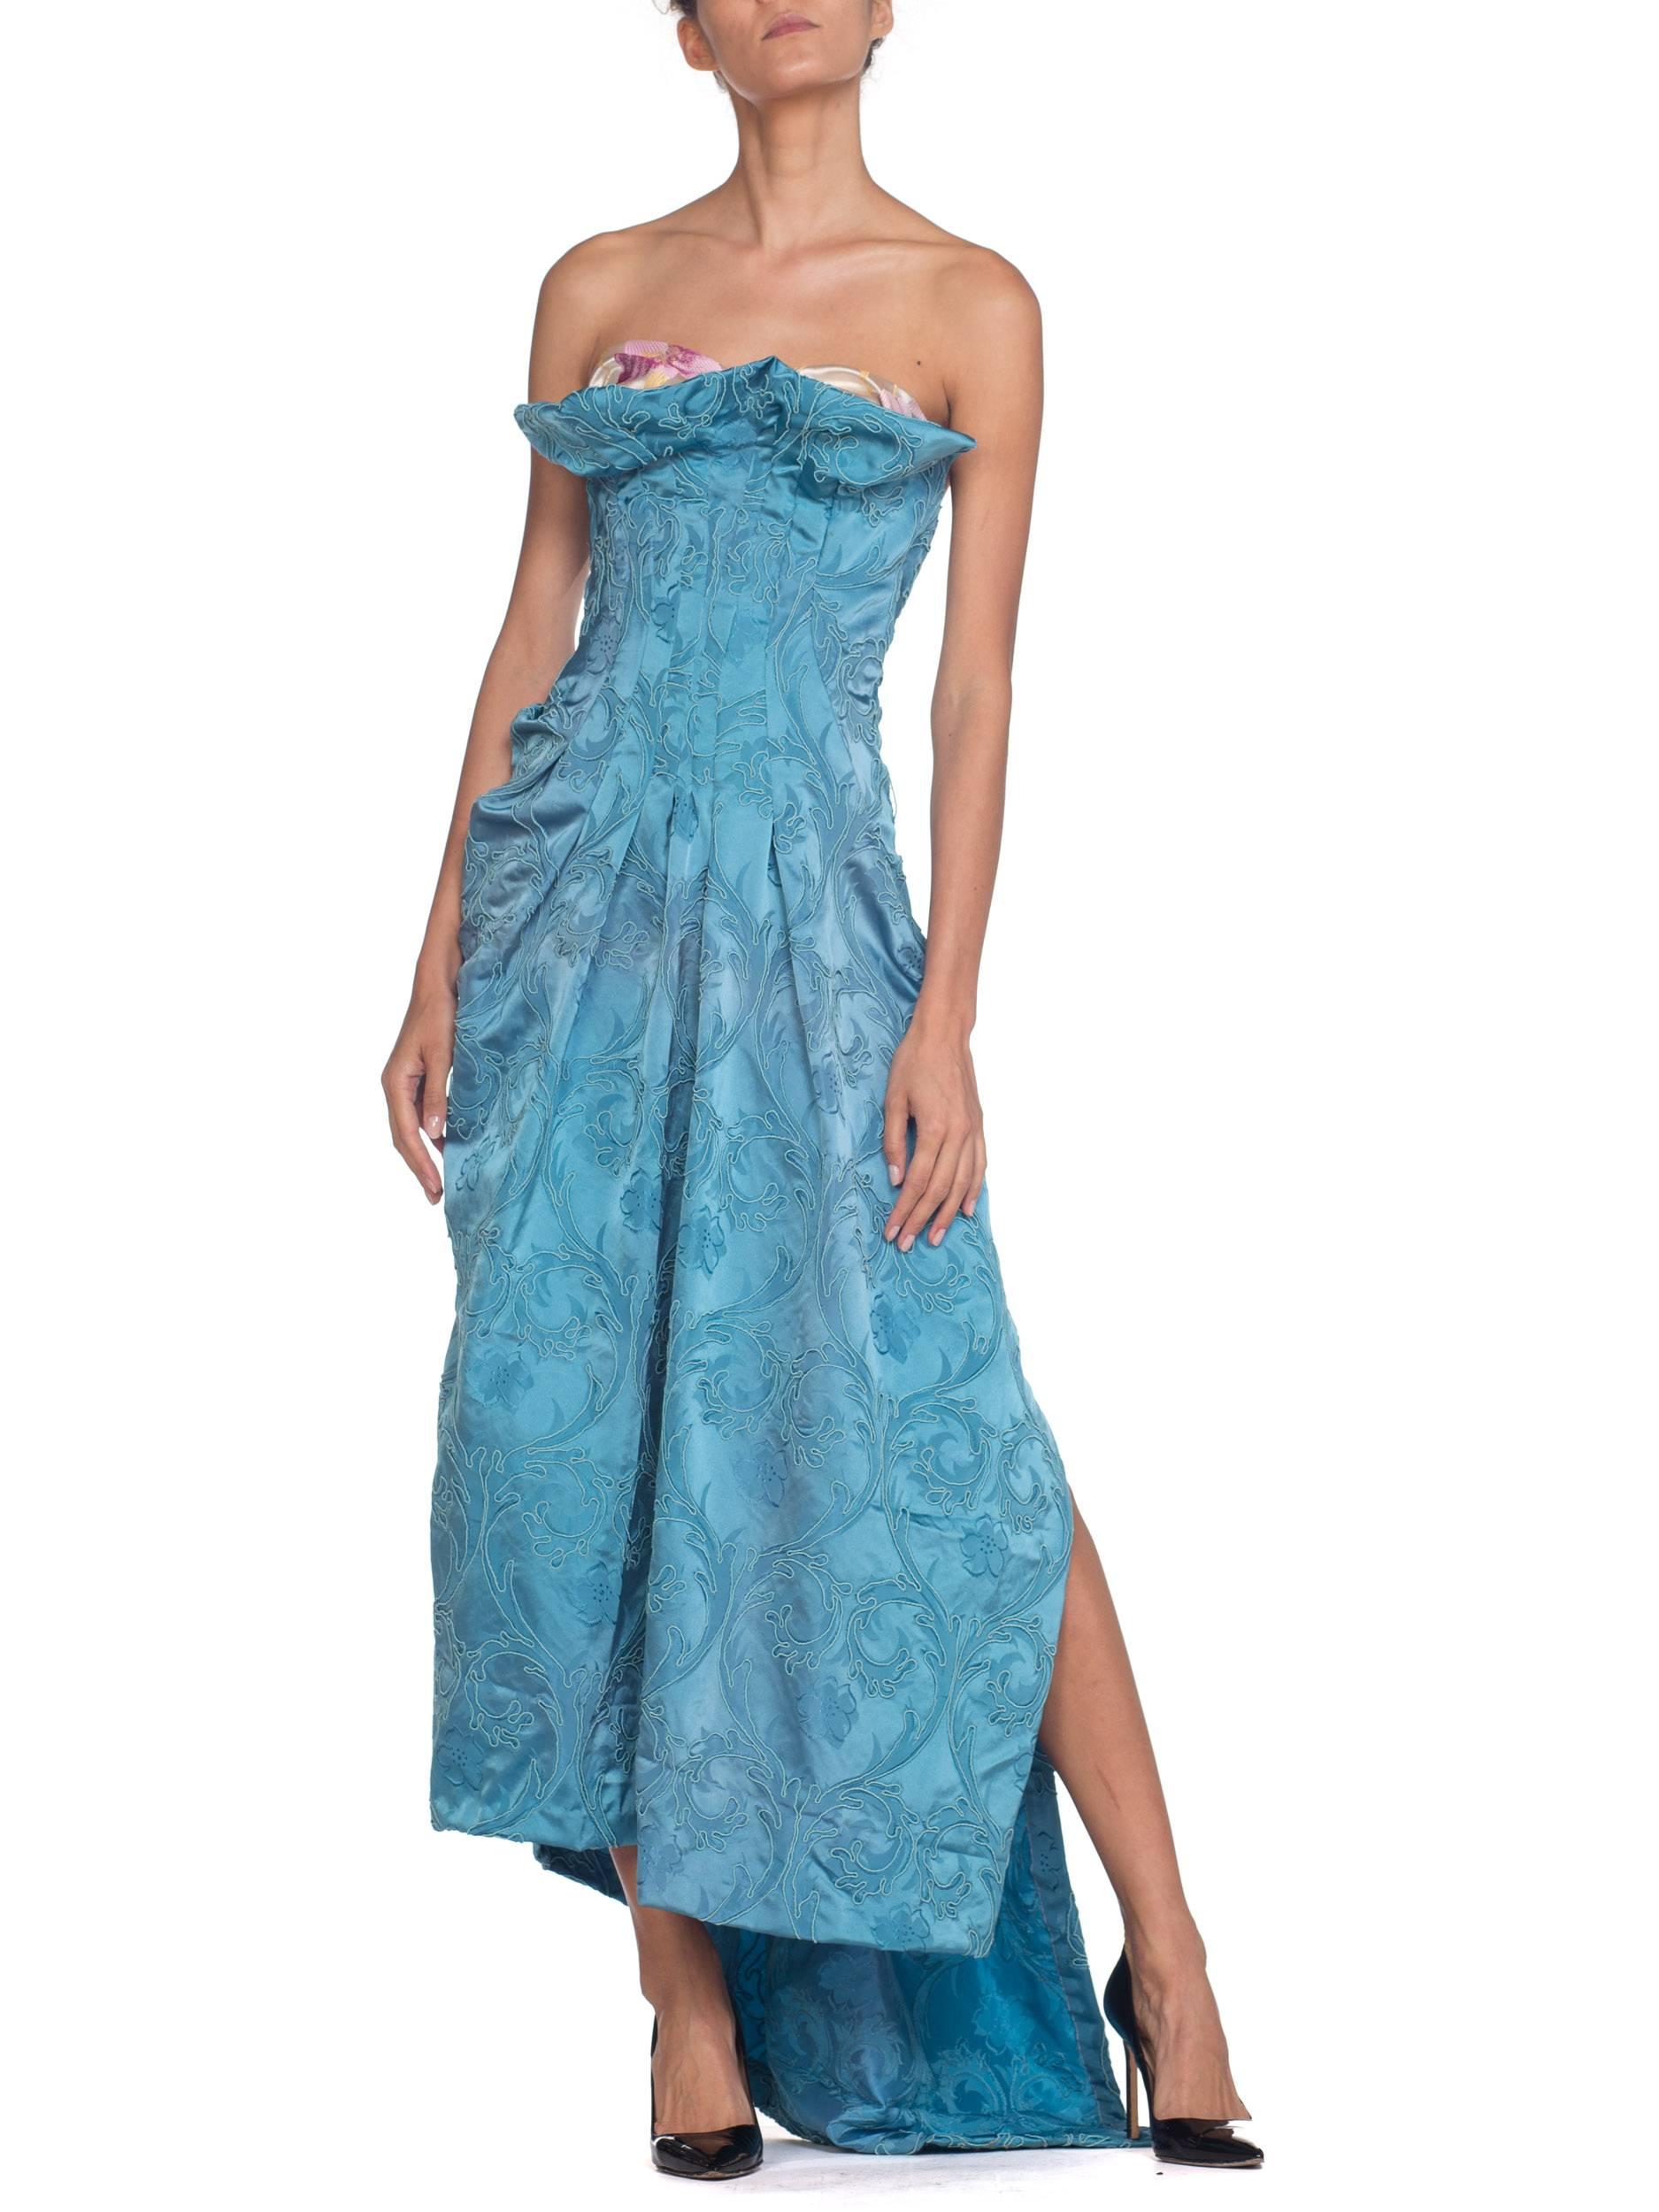 Morphew Strapless Gown with Boning Made from 1950s Blue Satin Demask  6